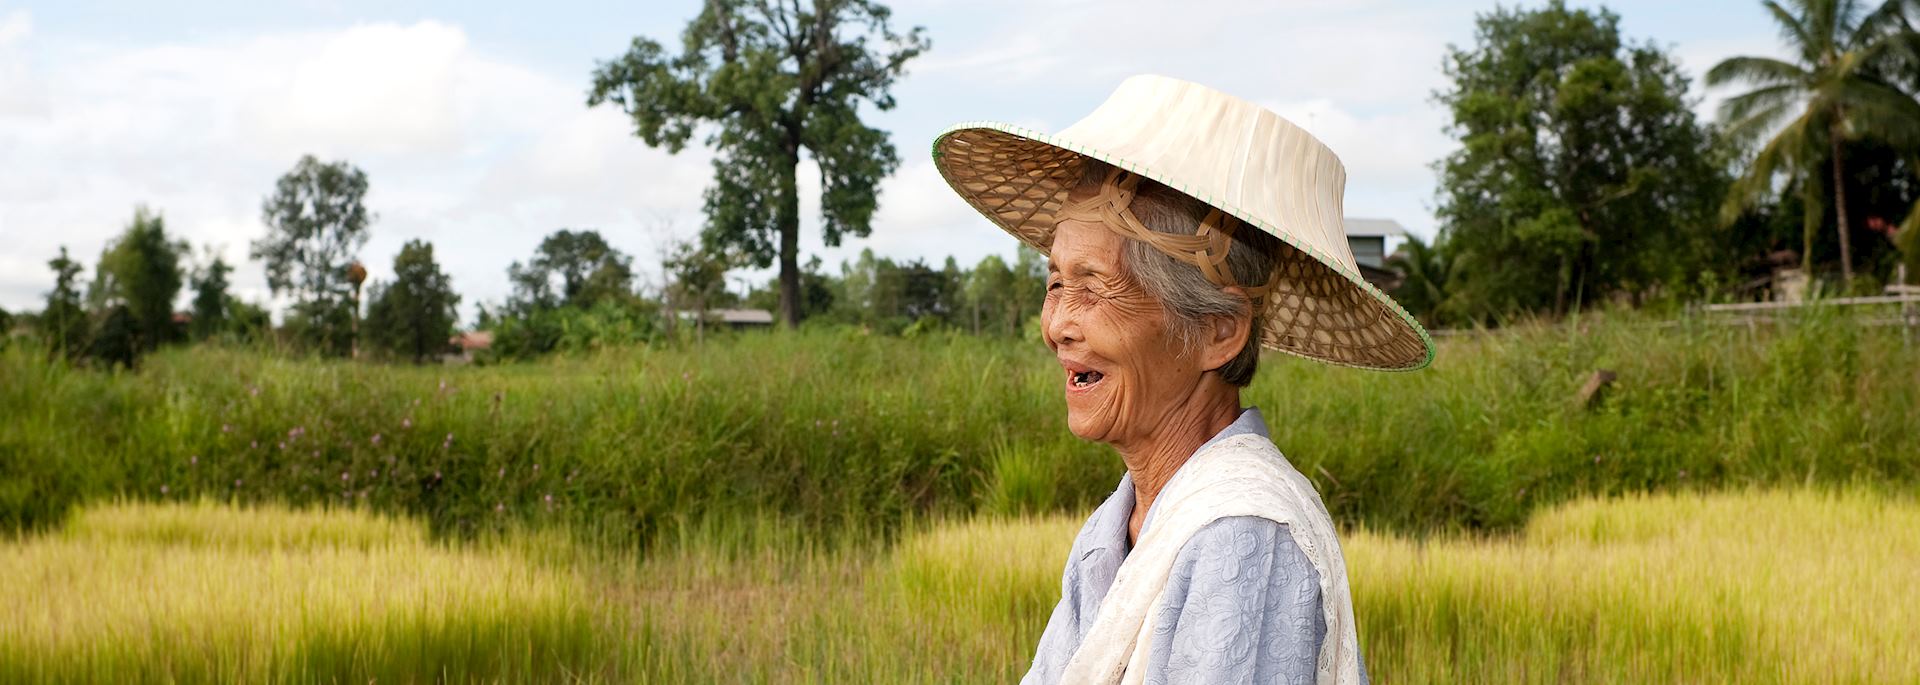 local woman working in a rice field, Thailand